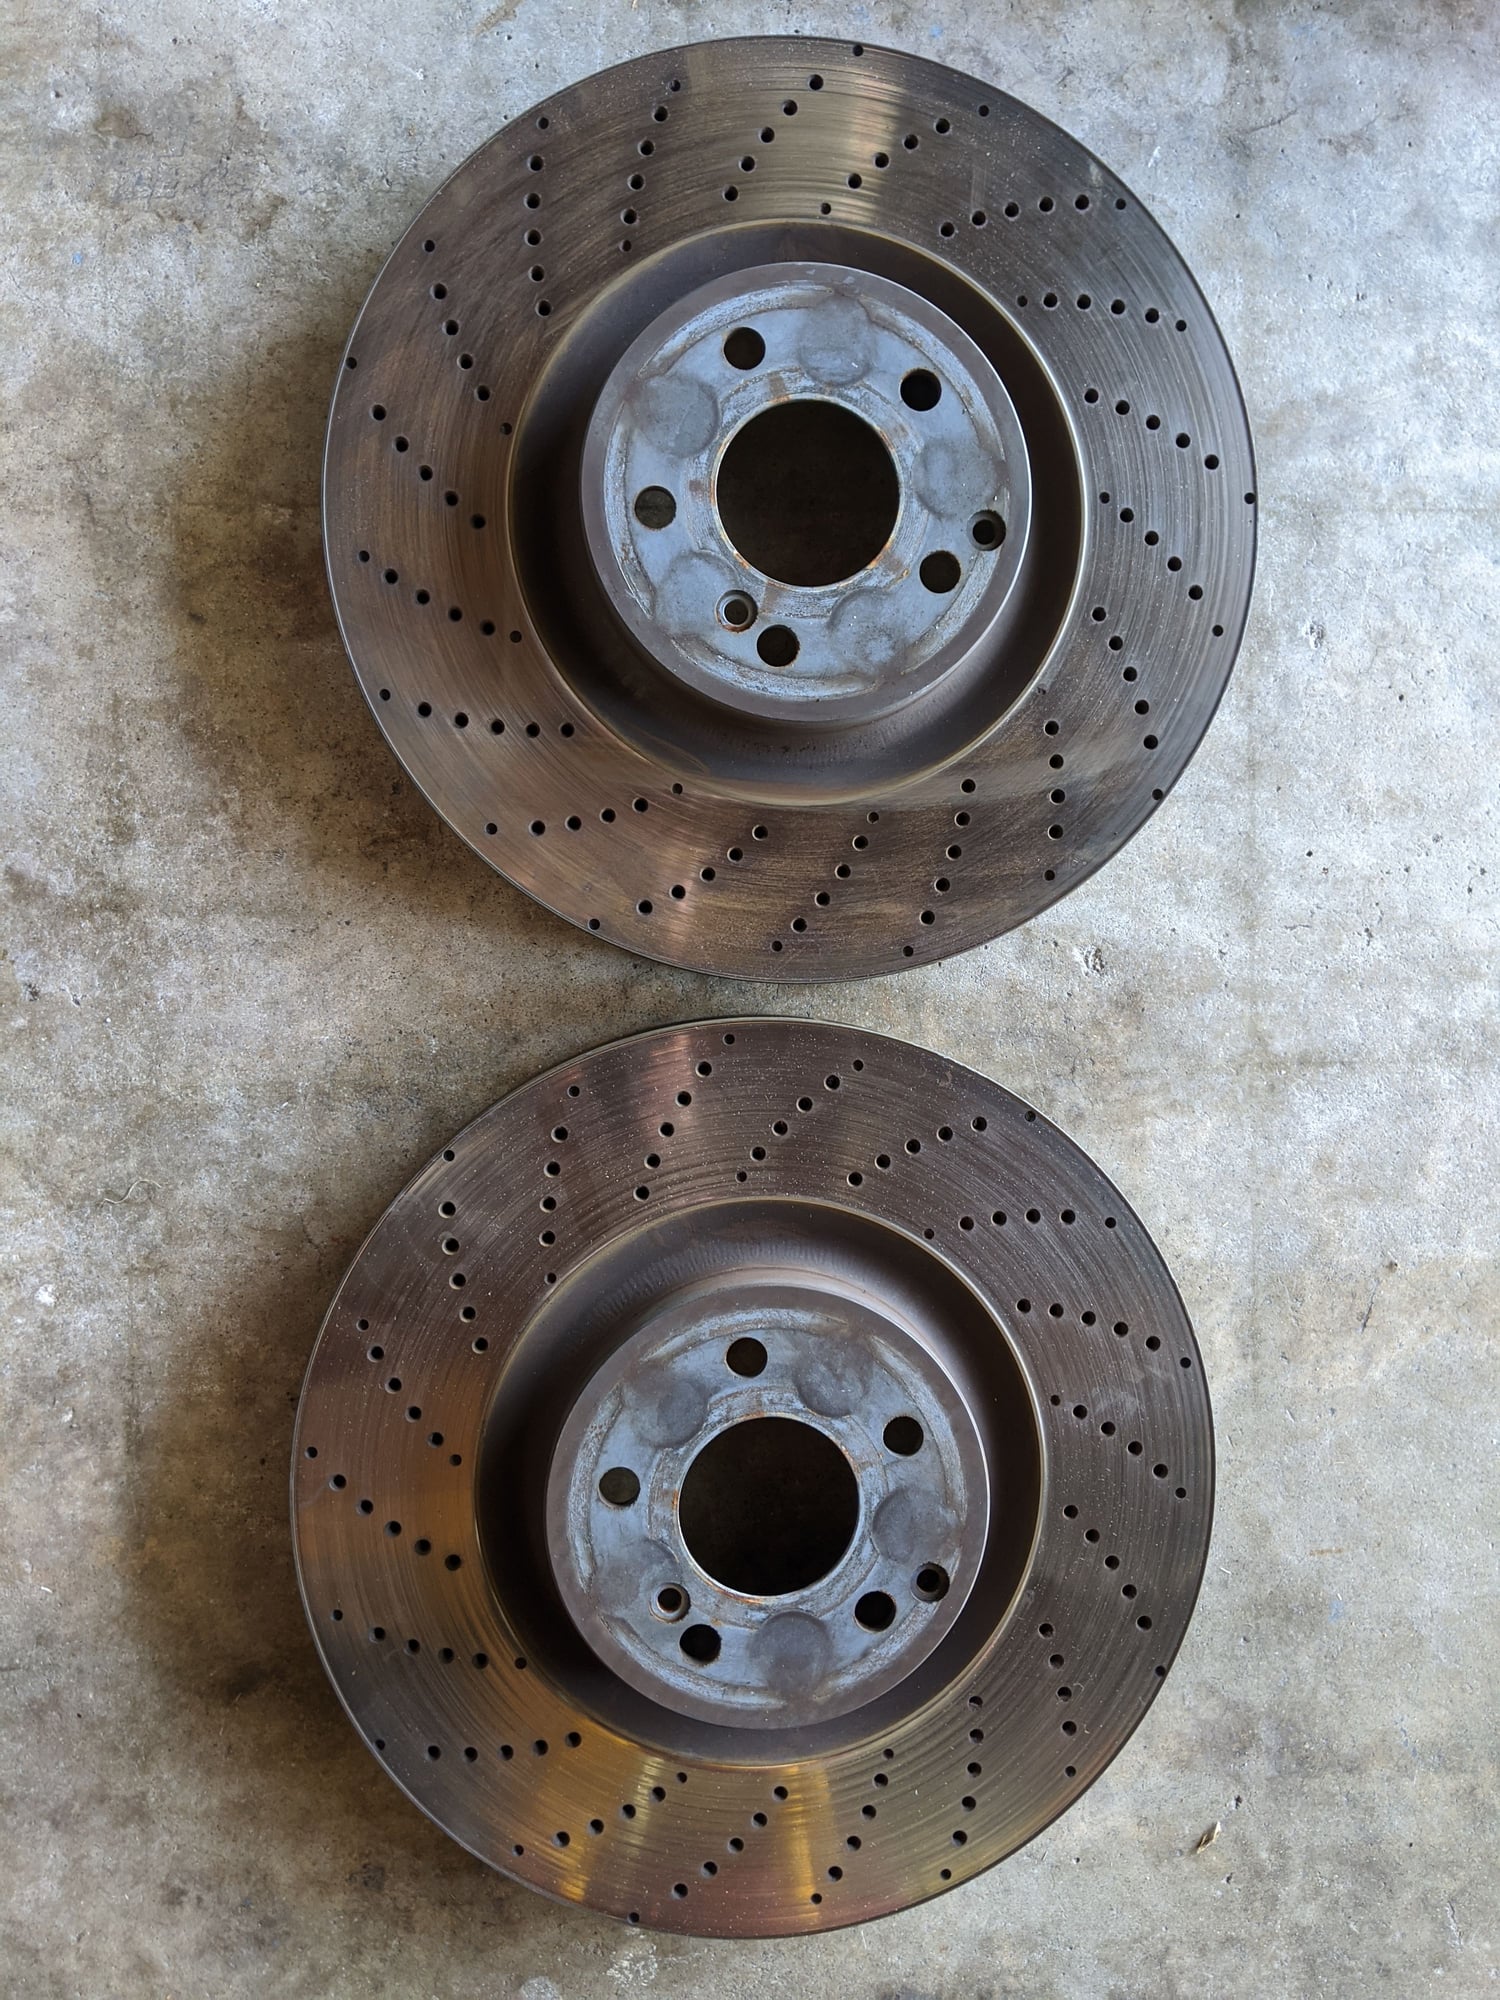 Brakes - 2008-2015 C63 Front OEM Rotors - Used - 2008 to 2015 Mercedes-Benz C63 AMG - Carson, CA 90745, United States